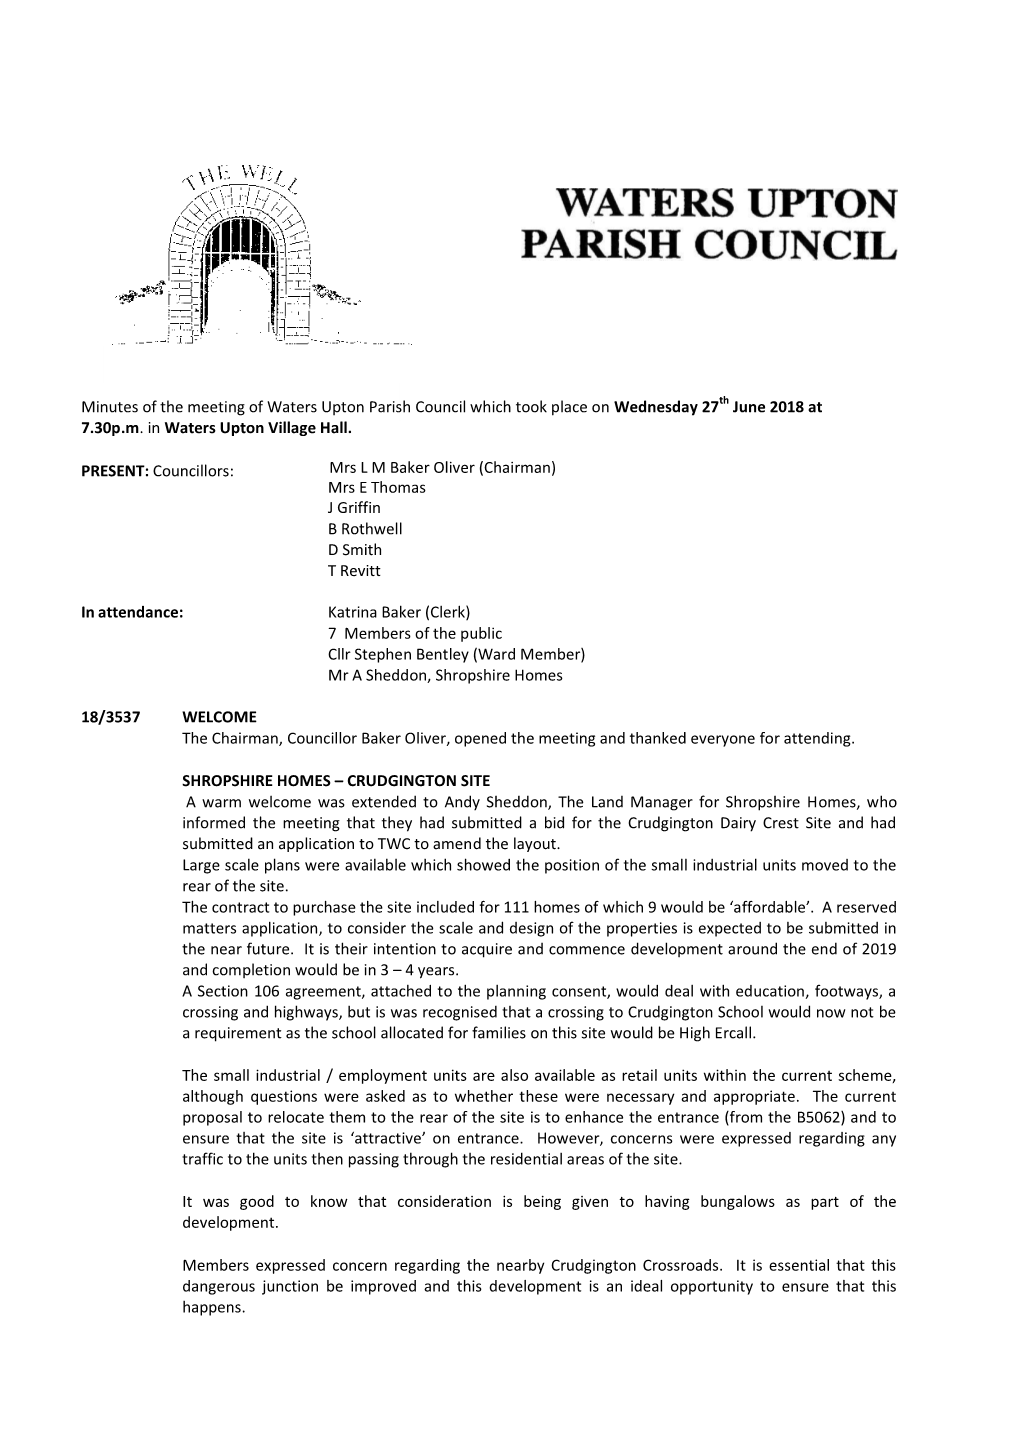 Minutes of the Meeting of Waters Upton Parish Council Which Took Place on Wednesday 27Th June 2018 at 7.30P.M. in Waters Upton Village Hall